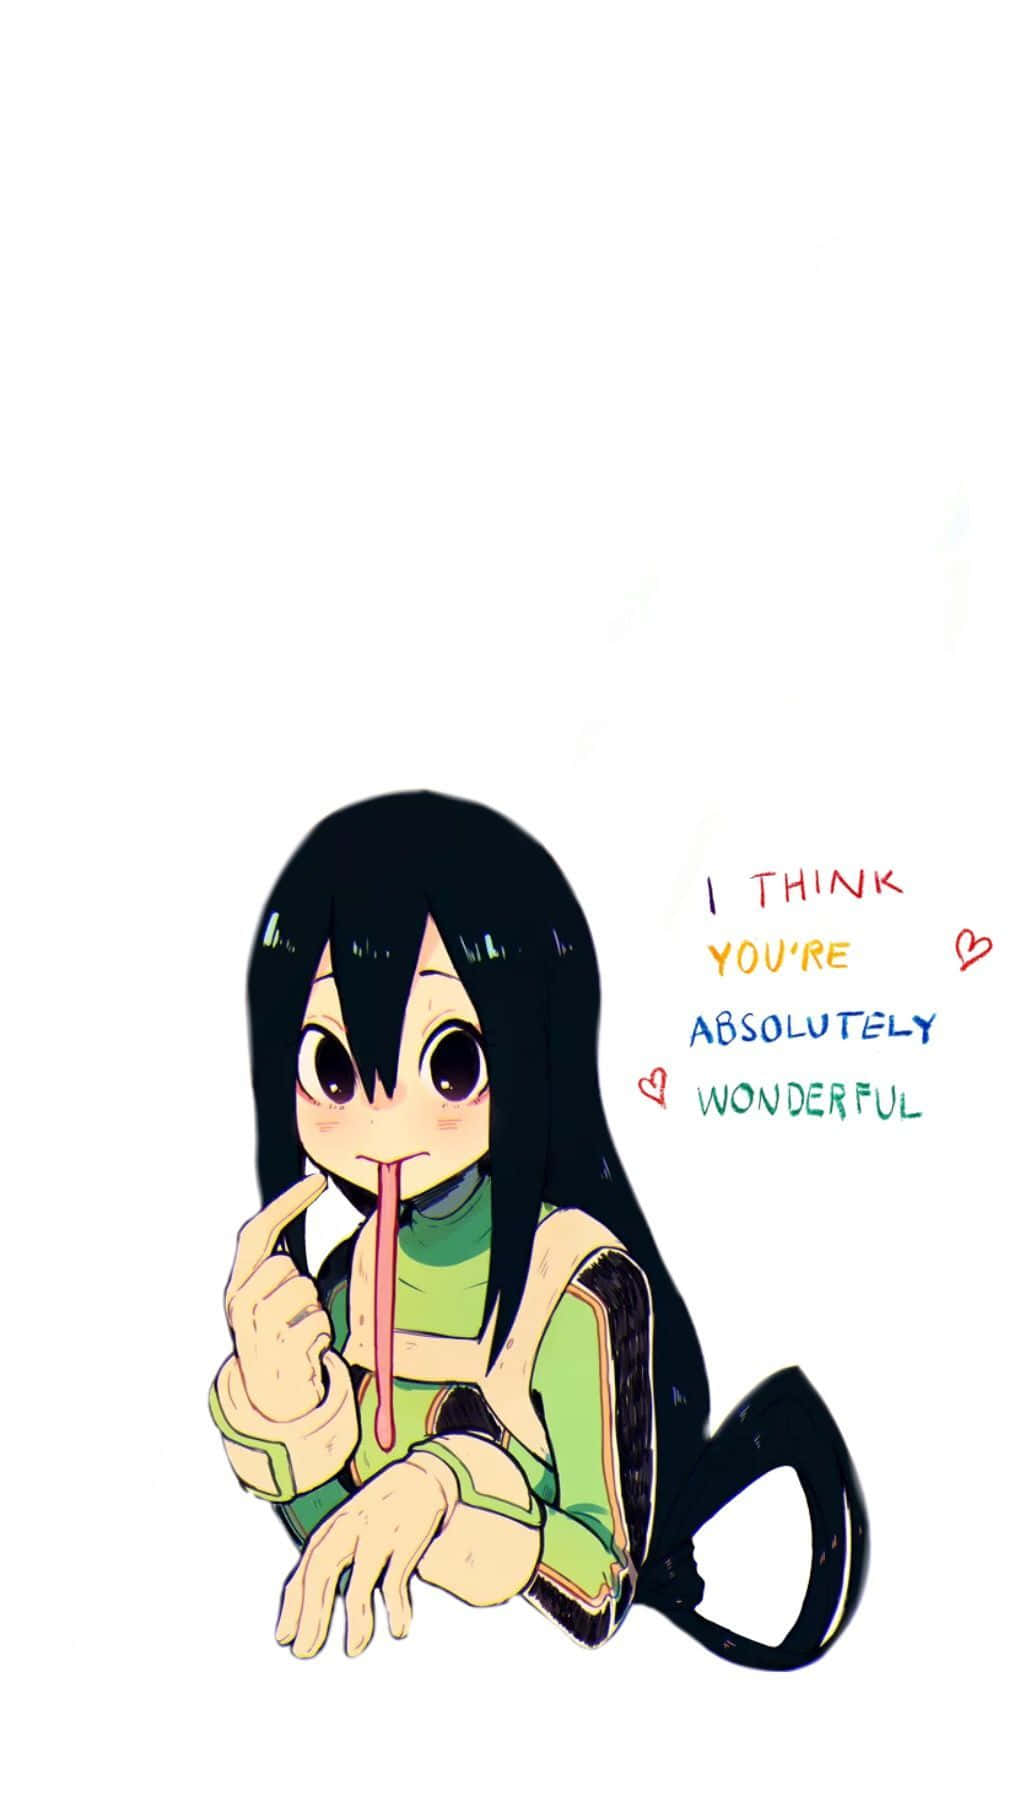 Froppy's signature wink.